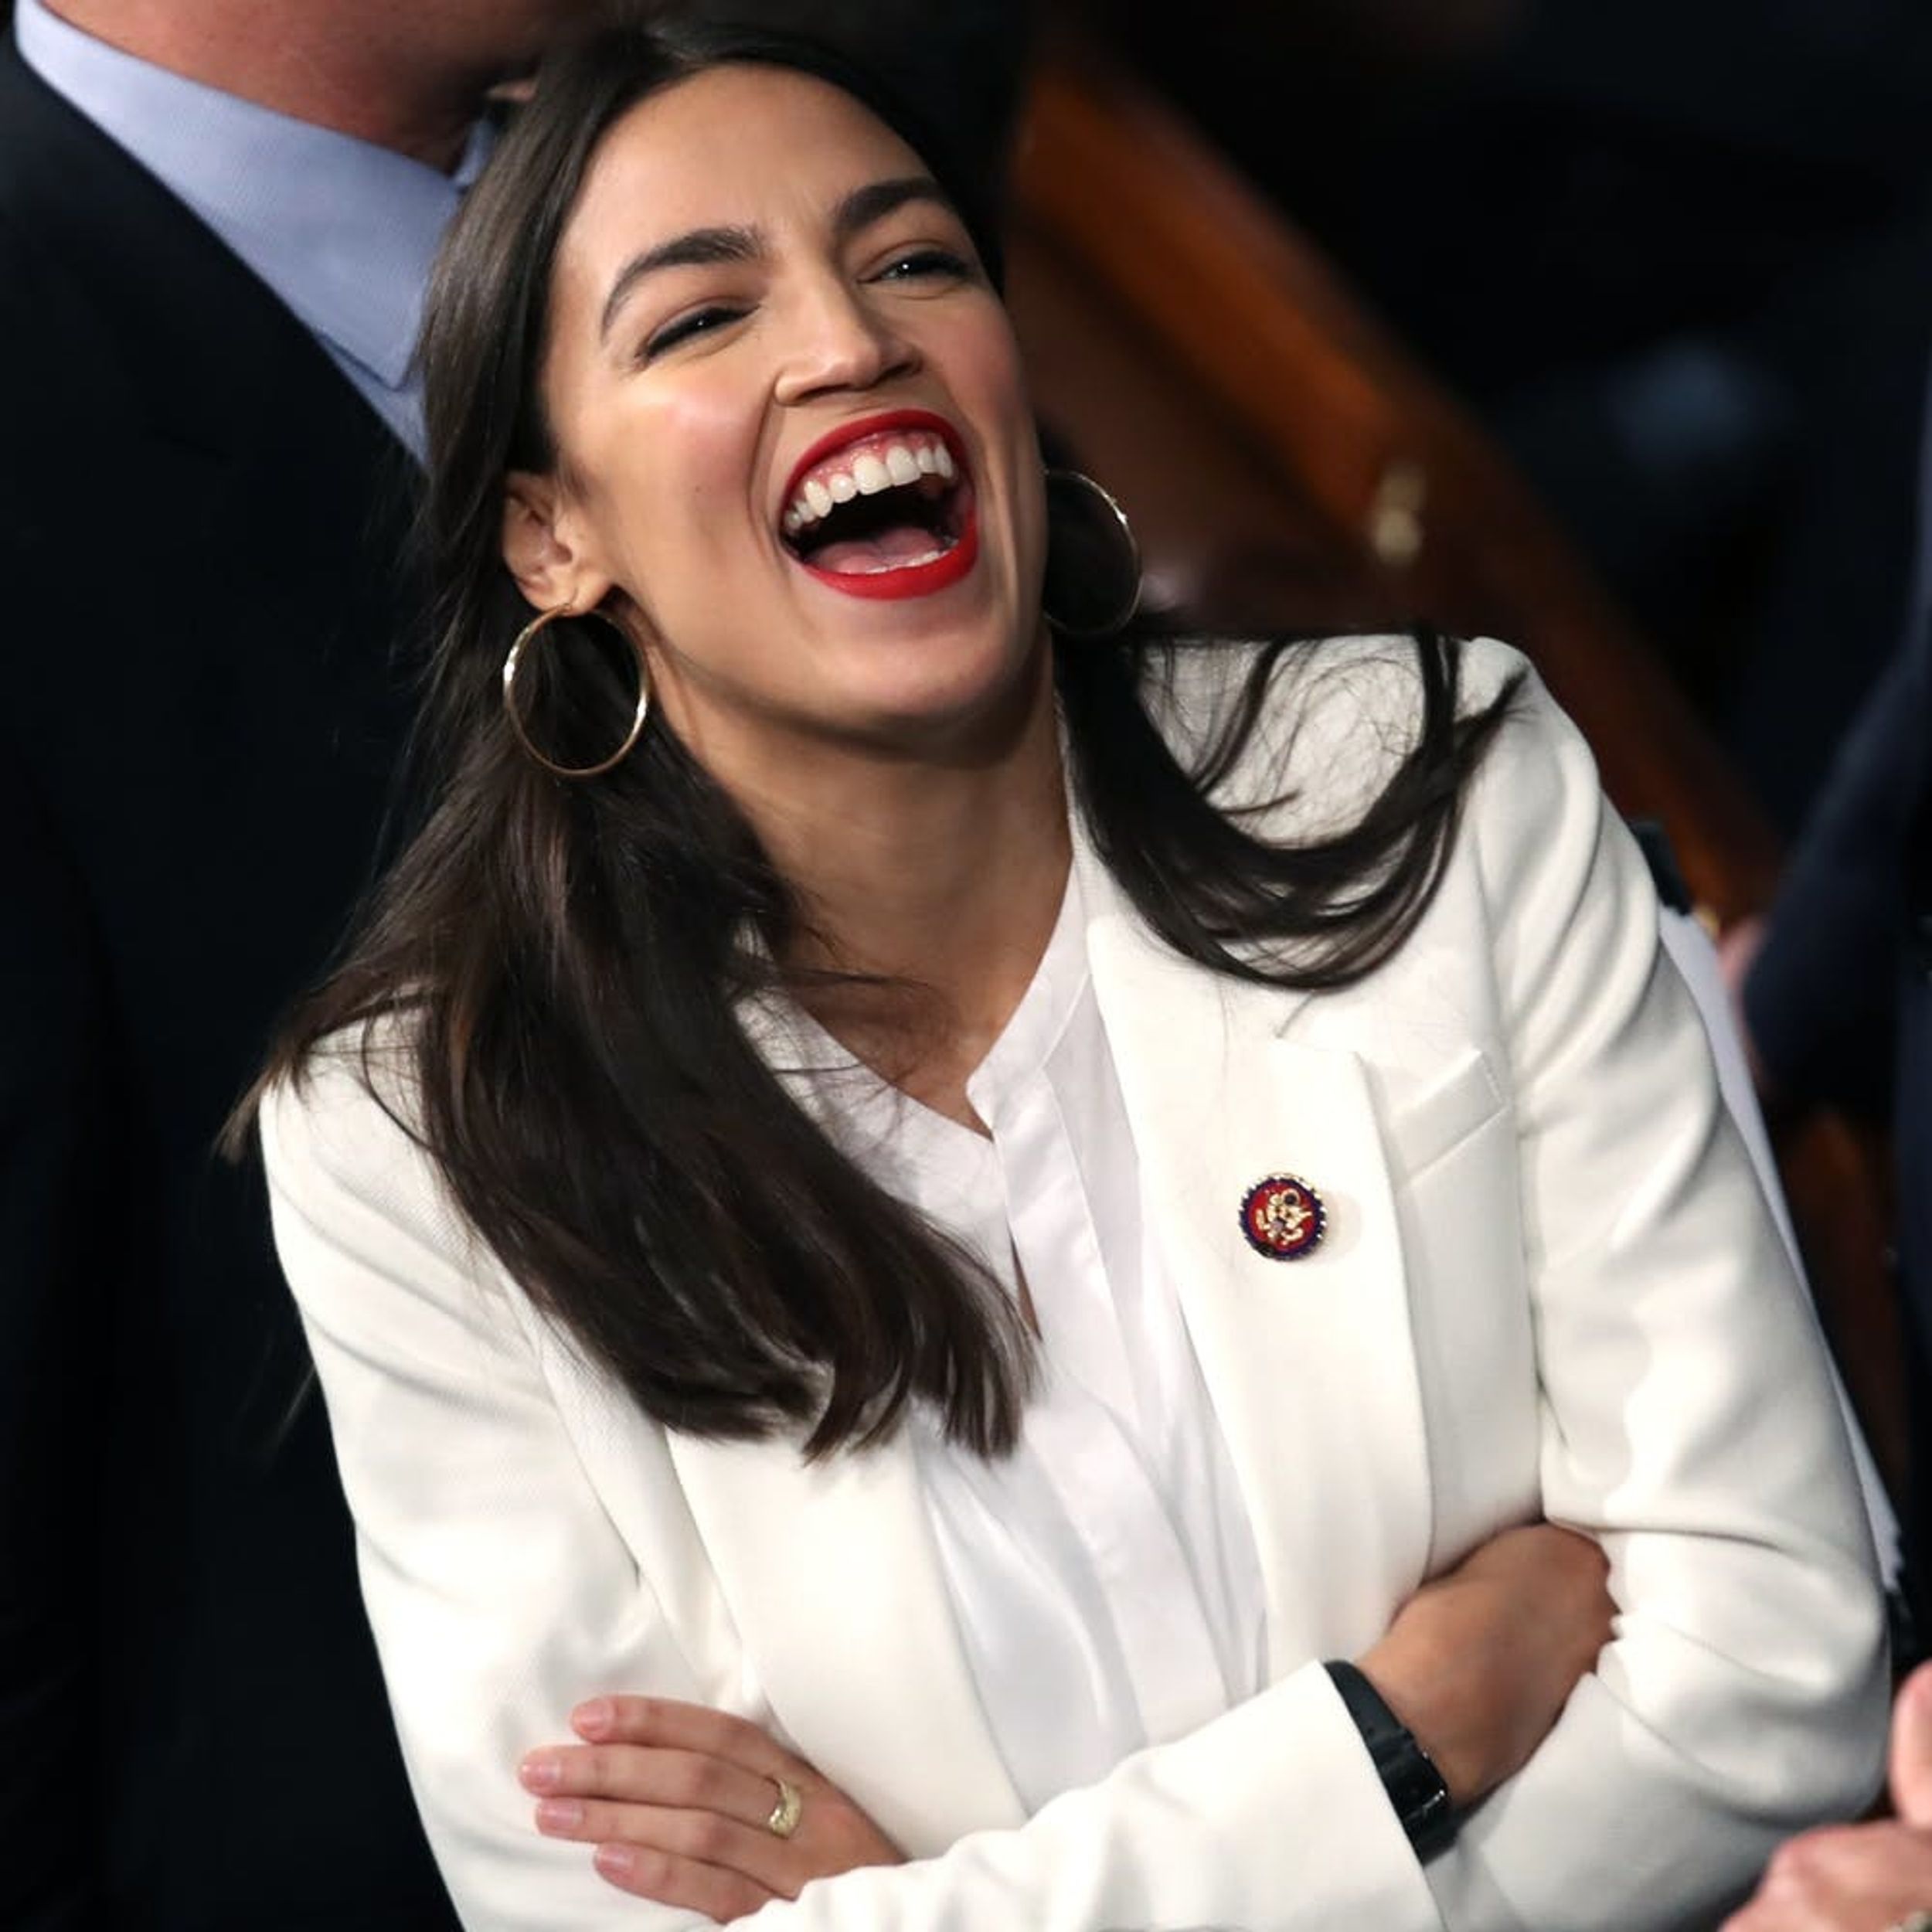 While the Internet Was Celebrating Alexandria Ocasio-Cortez’s Dance Moves, She Voted Against a Key Campaign Promise